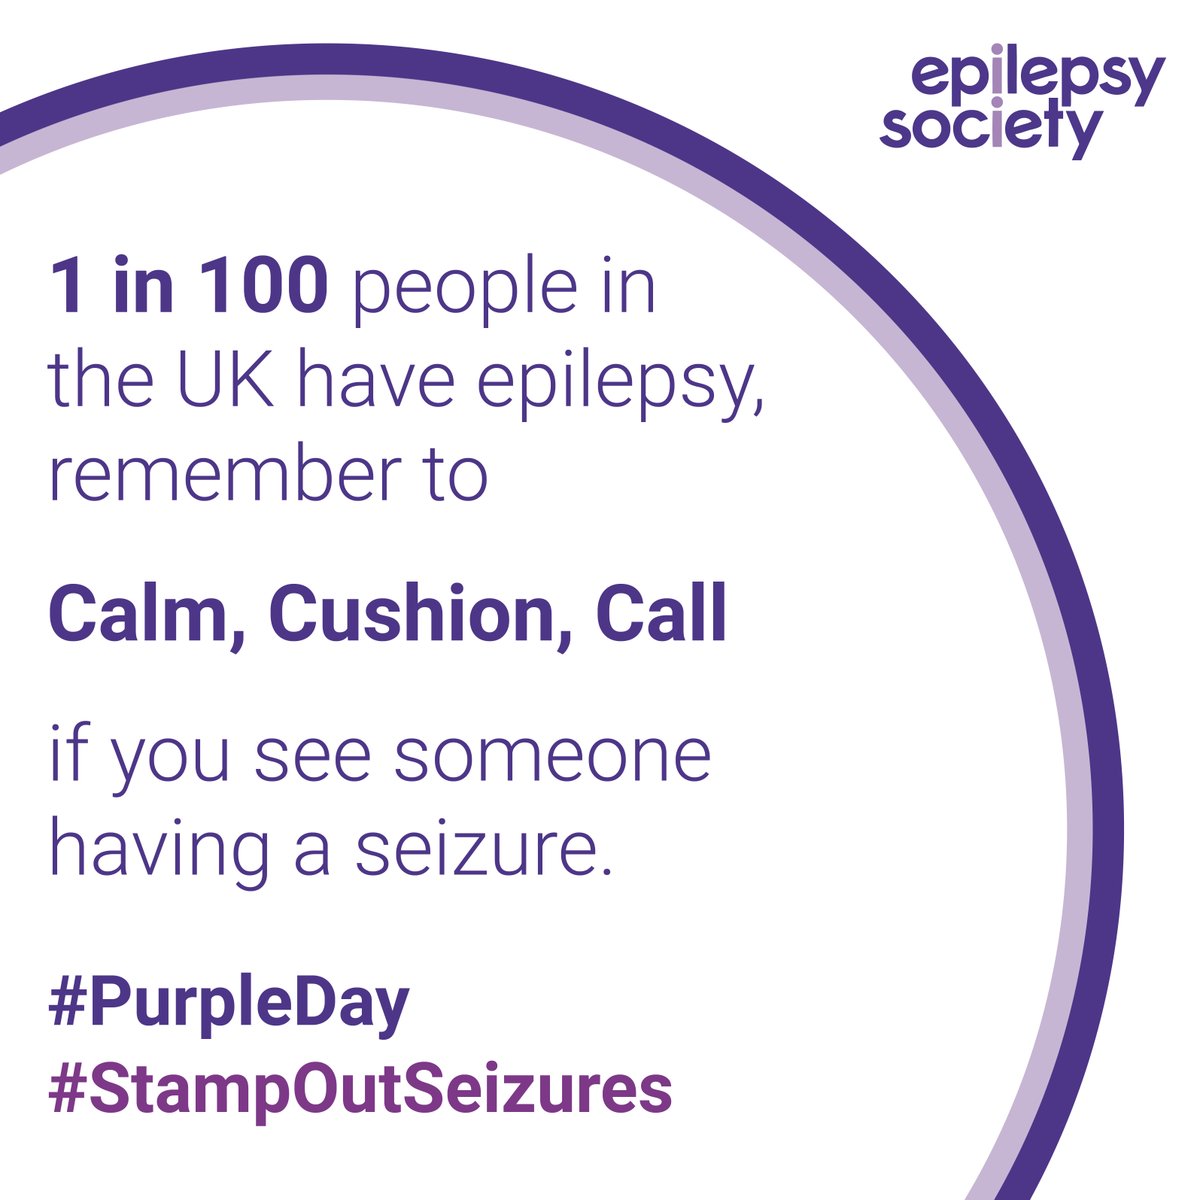 Today is #PurpleDay and I want to show my support for this year’s theme of #StampOutSeizures. Today is an opportunity to raise awareness for the 630,000 people in the UK that have epilepsy. For more epilepsy info @epilepsysociety